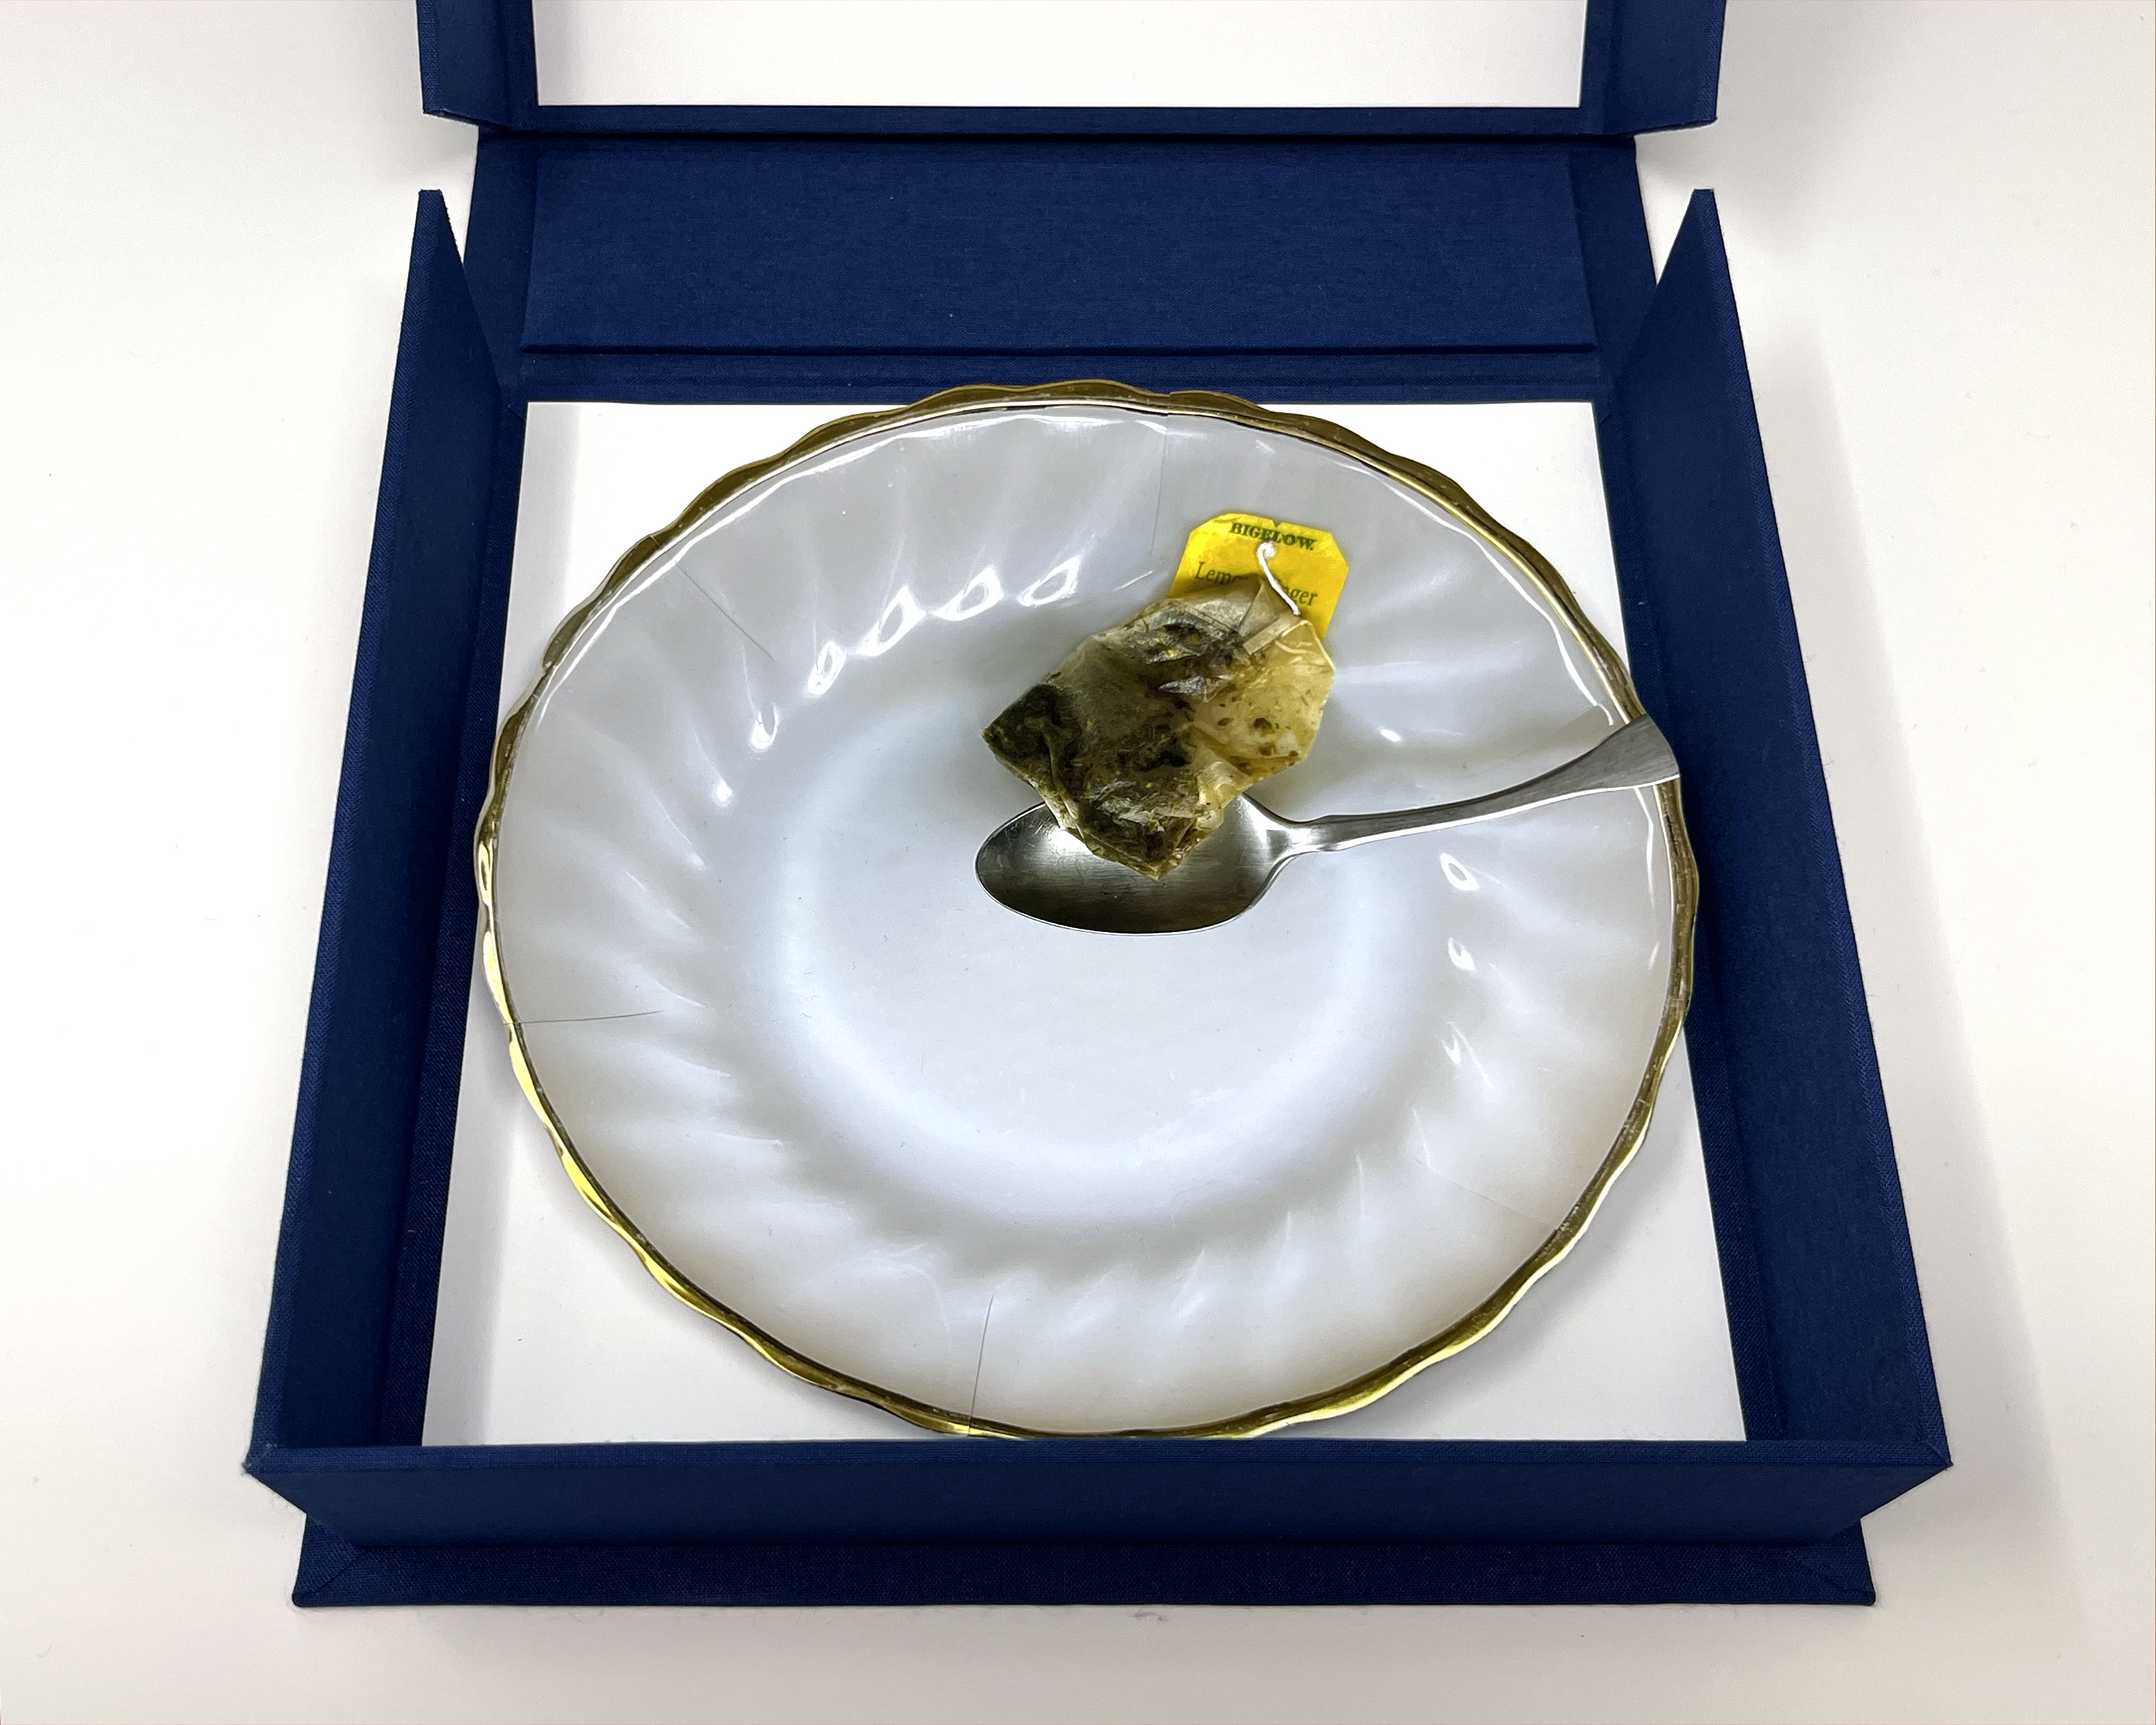 box open to show plate #8: a plate containing a photograph a used teabag and spoon